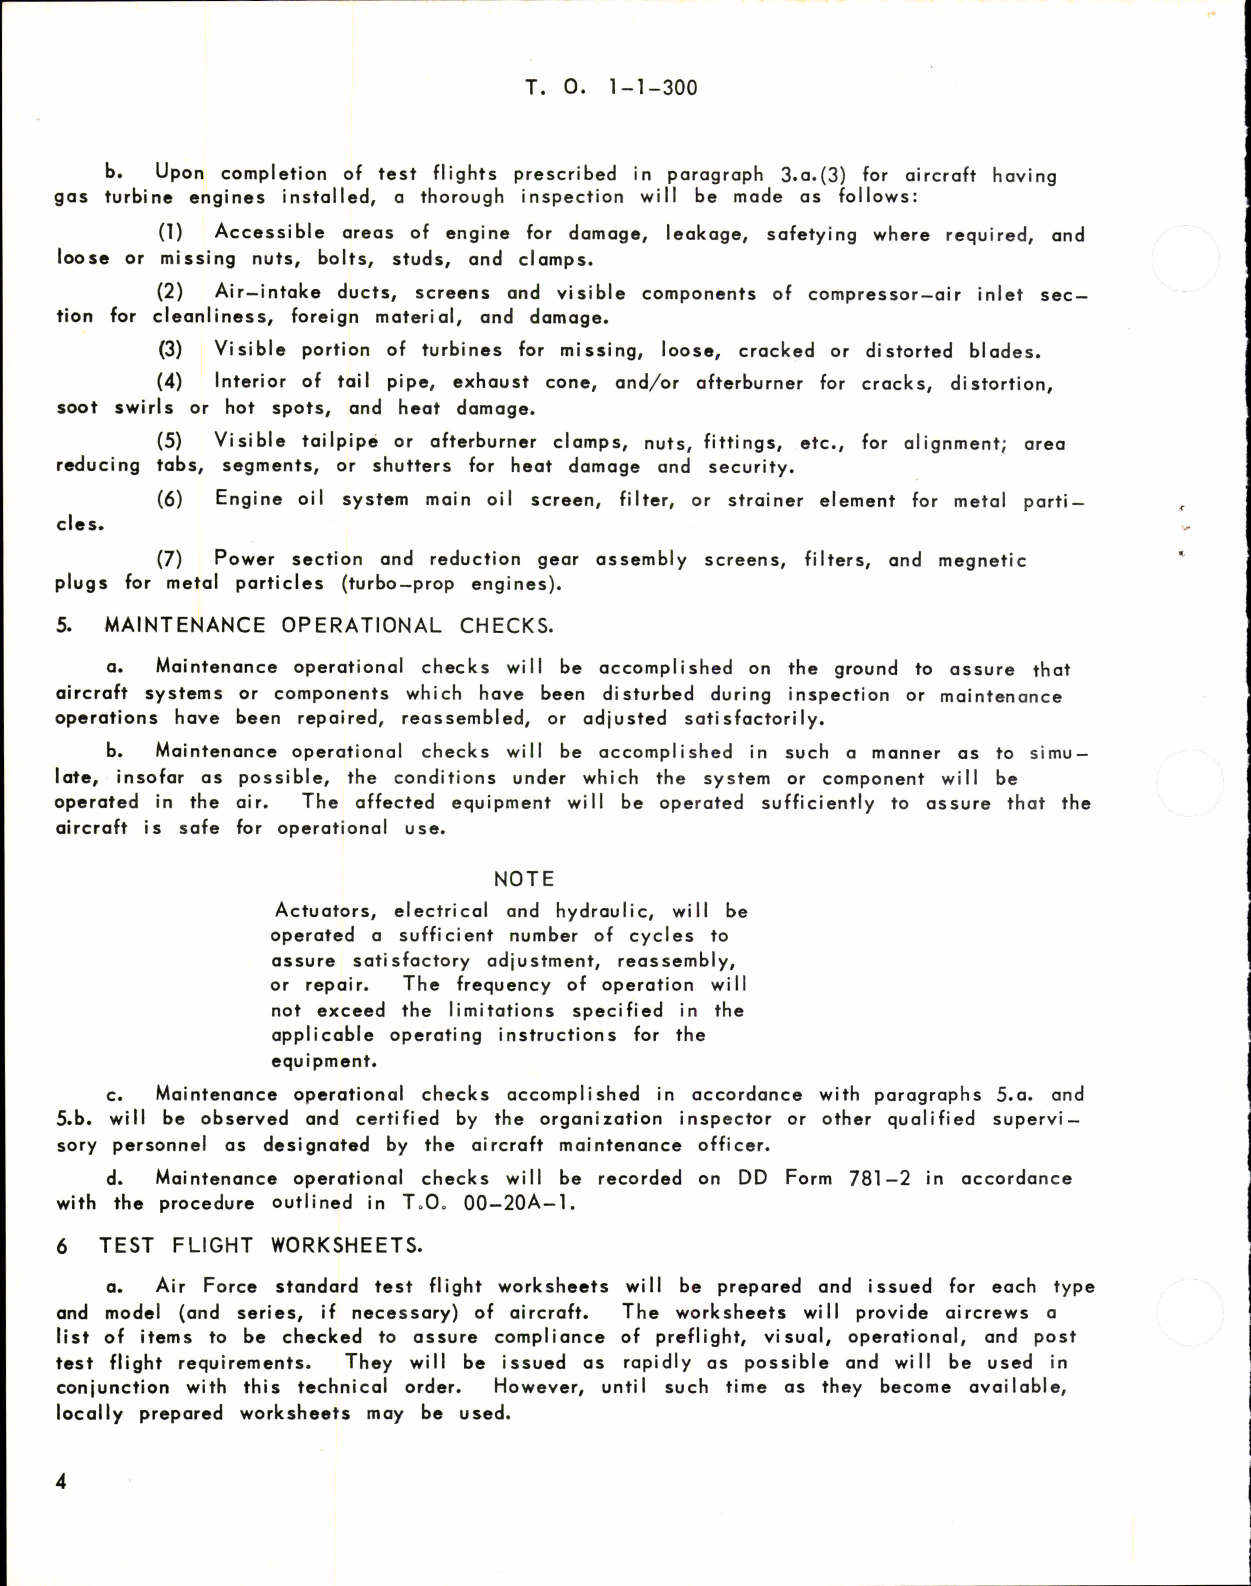 Sample page 4 from AirCorps Library document: Test Flight and Operational Checks